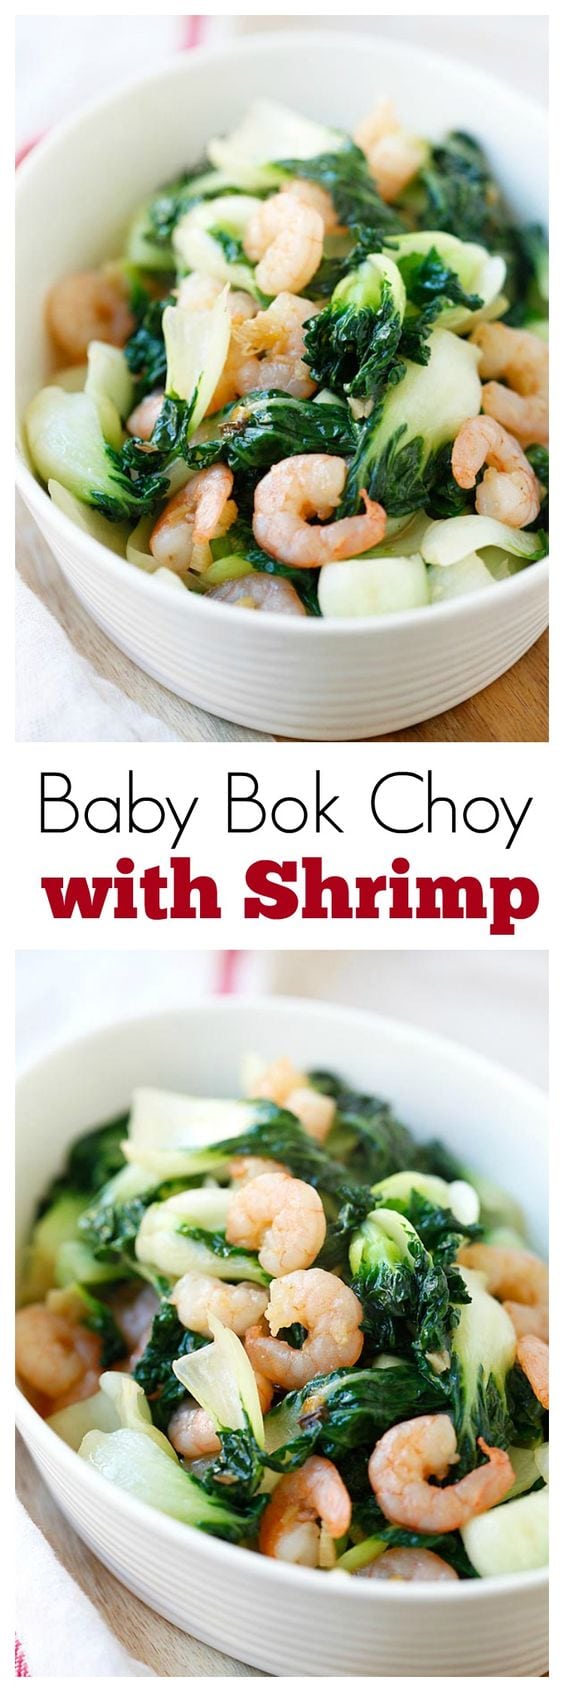 Baby Bok Choy with Shrimp – healthy and delicious baby bok choy stir fried with shrimp. 3 ingredients, so easy to make. Perfect for a wholesome meal | rasamalaysia.com